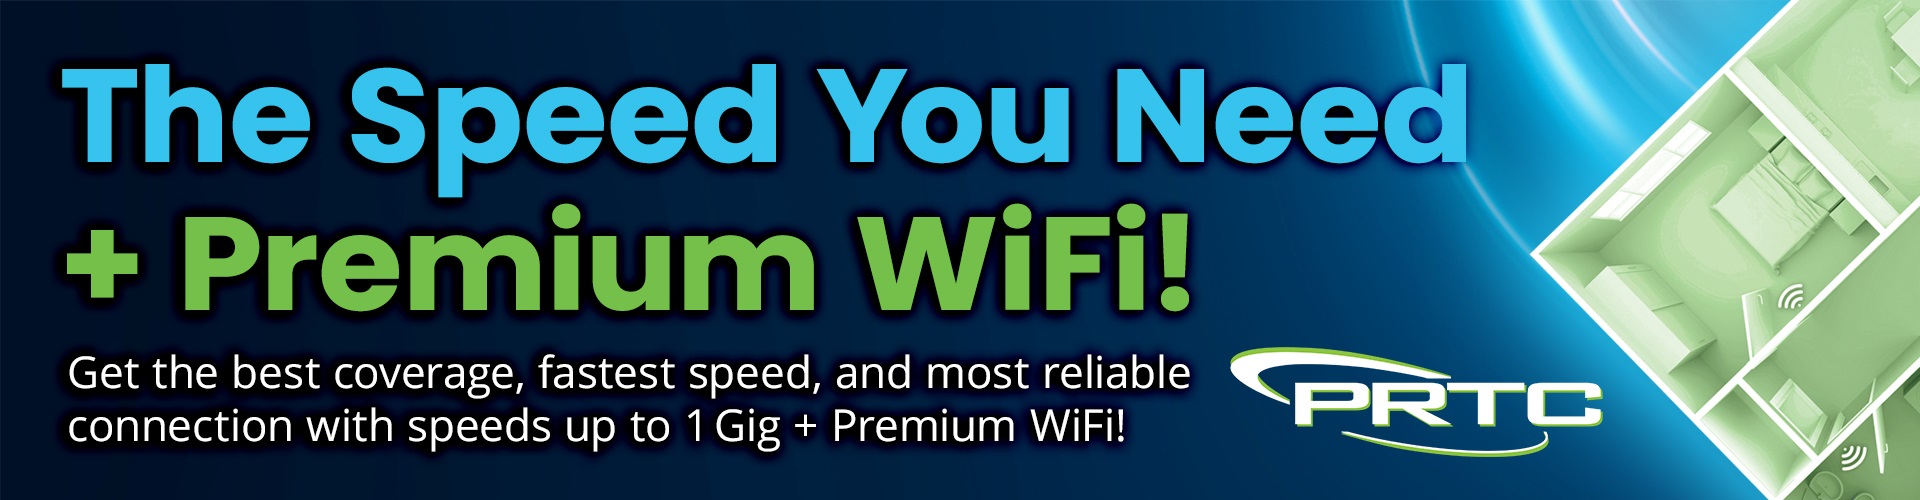 The speed you need and premium wifi